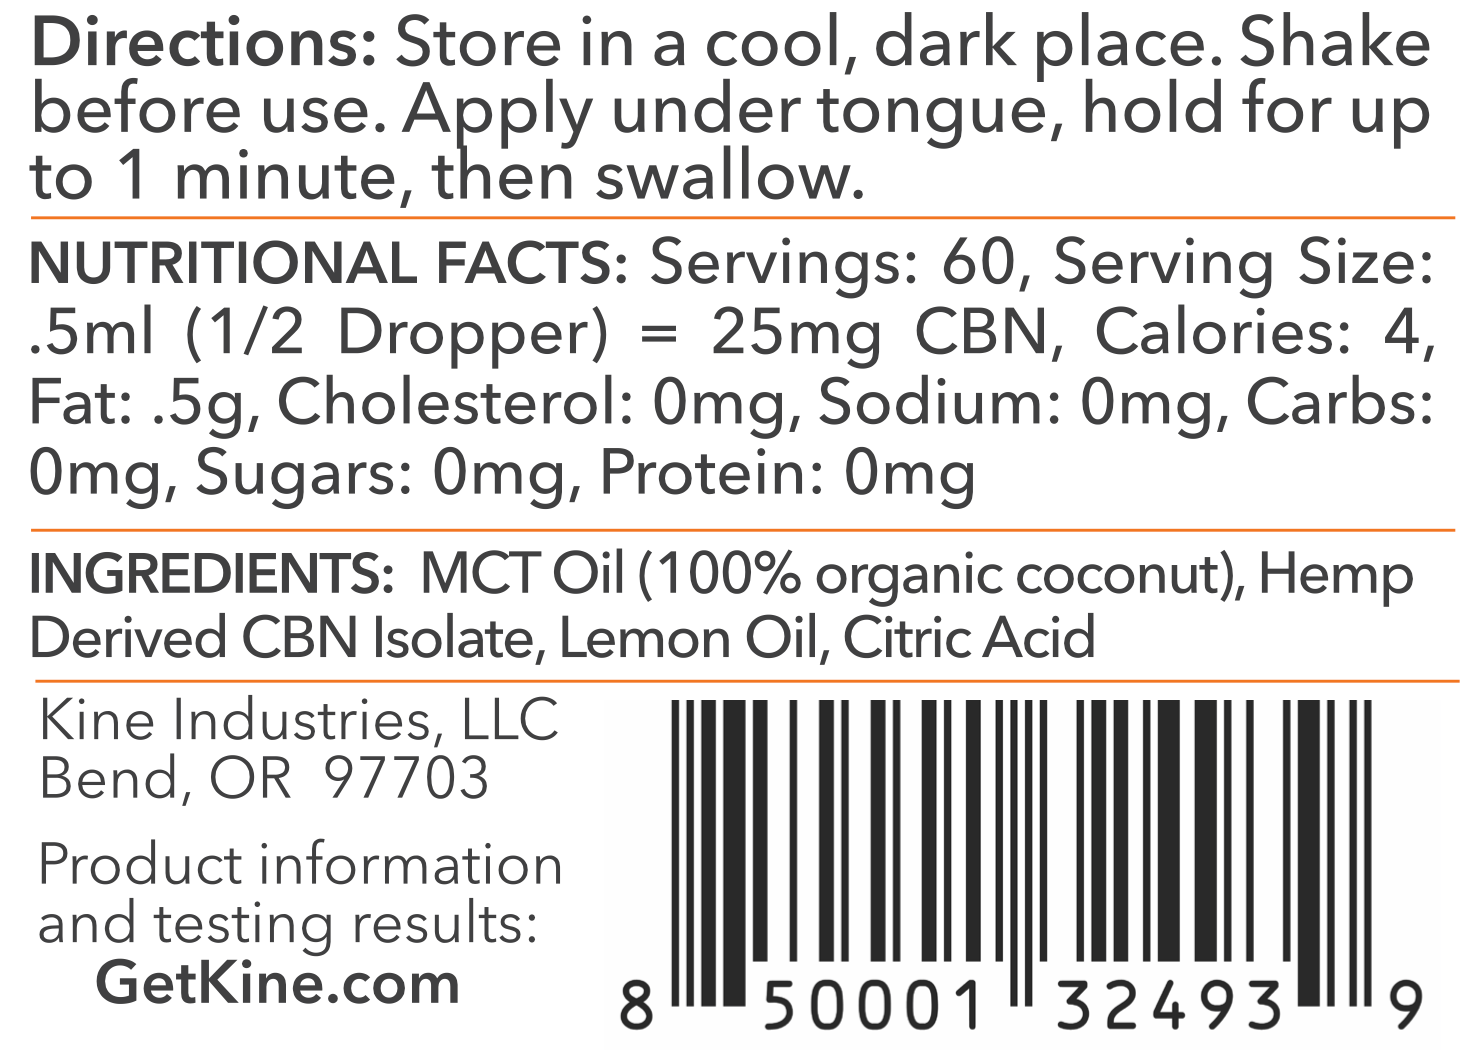 Kine Lemon flavored organic CBN 1500mg tincture drops Ingredients List and Nutritional Facts